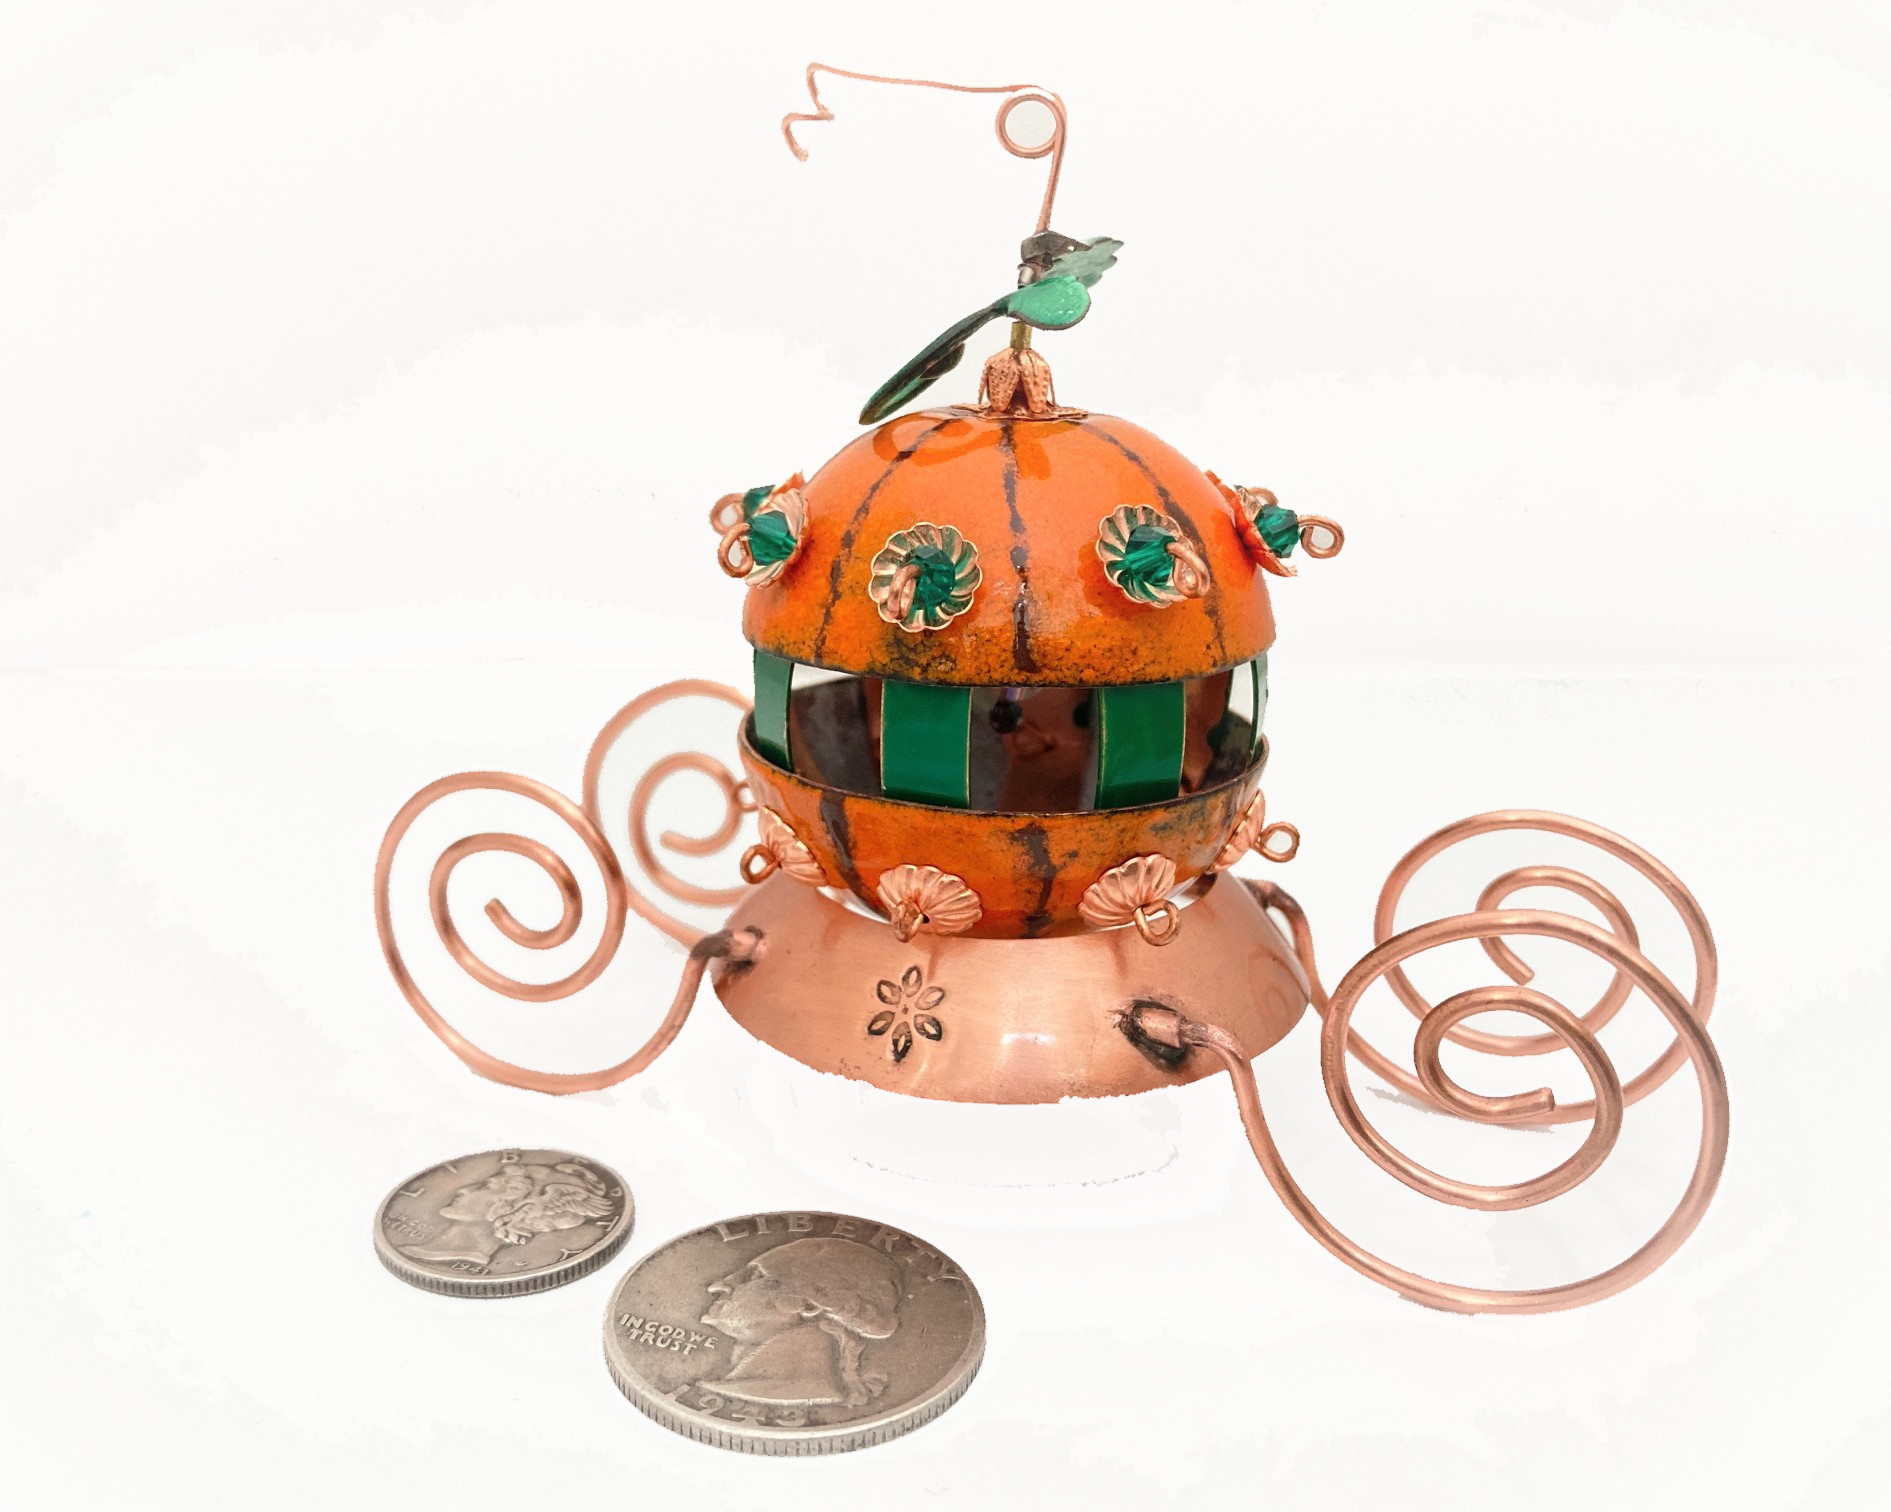 miniature pumpkin carriage made of copper enamel and copper wire showing size related to dime and quarter